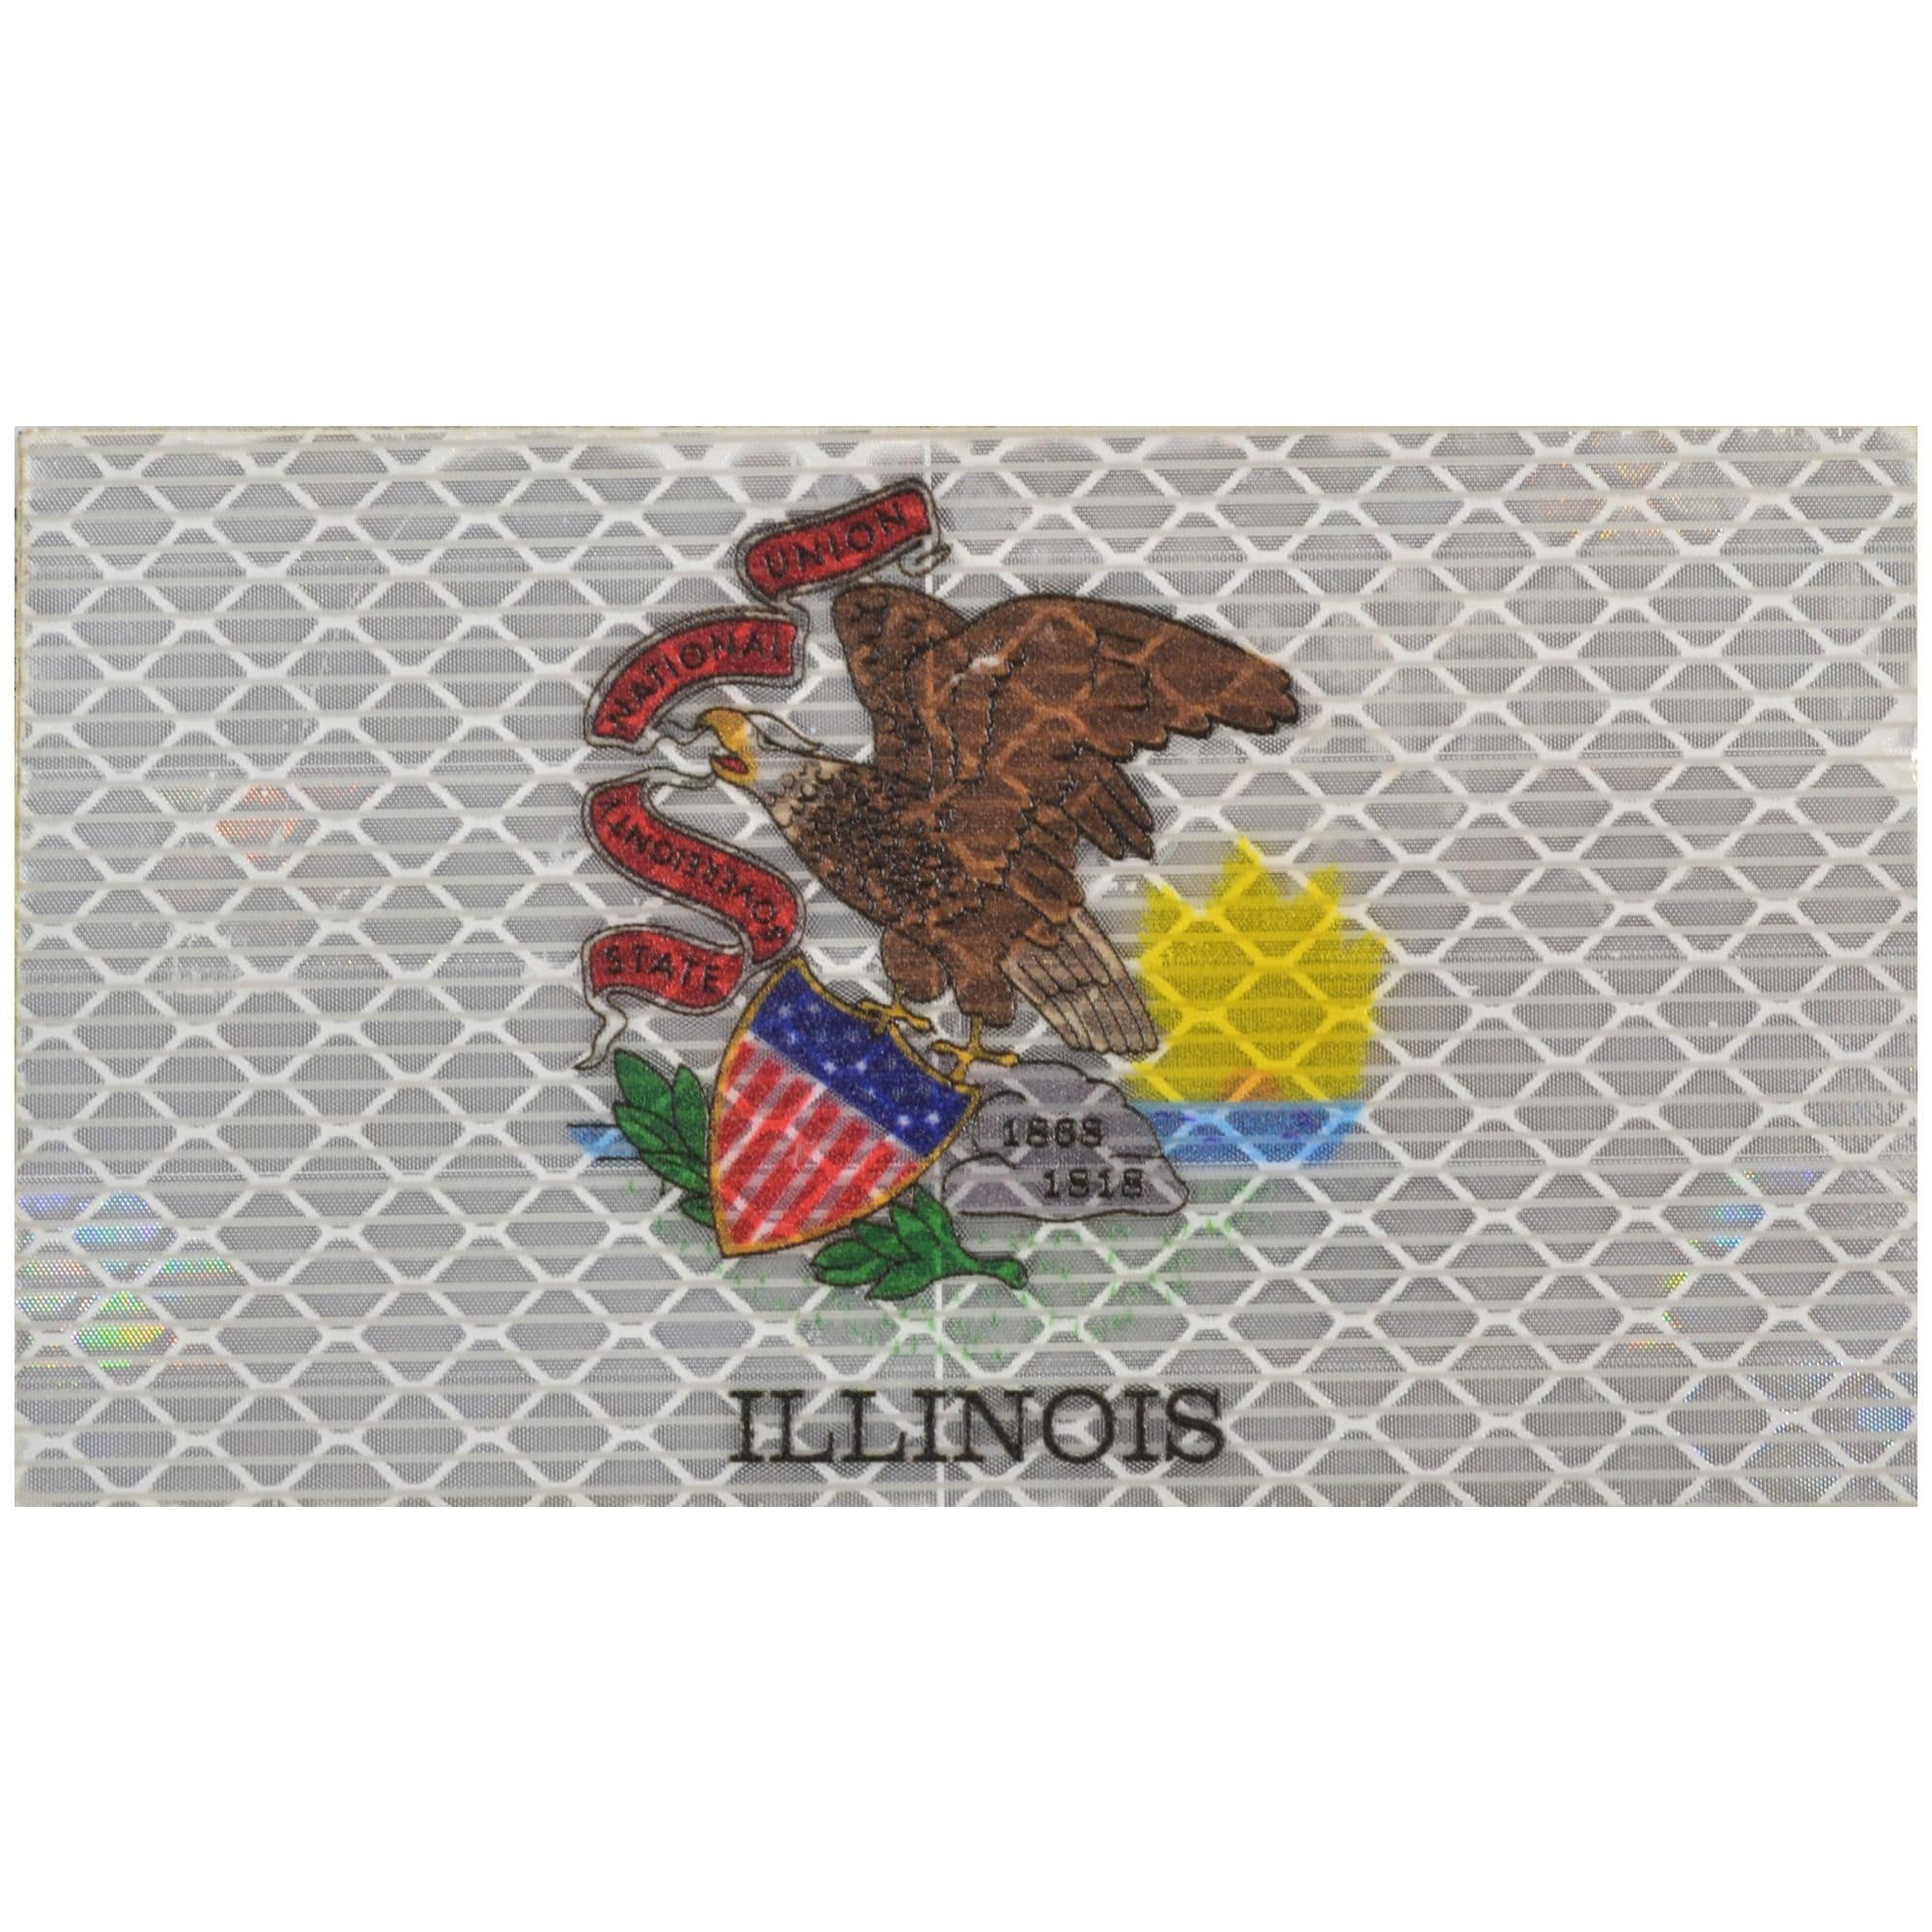 Tactical Gear Junkie Patches Reflective Illinois State Flag - 2x3.5 Patch